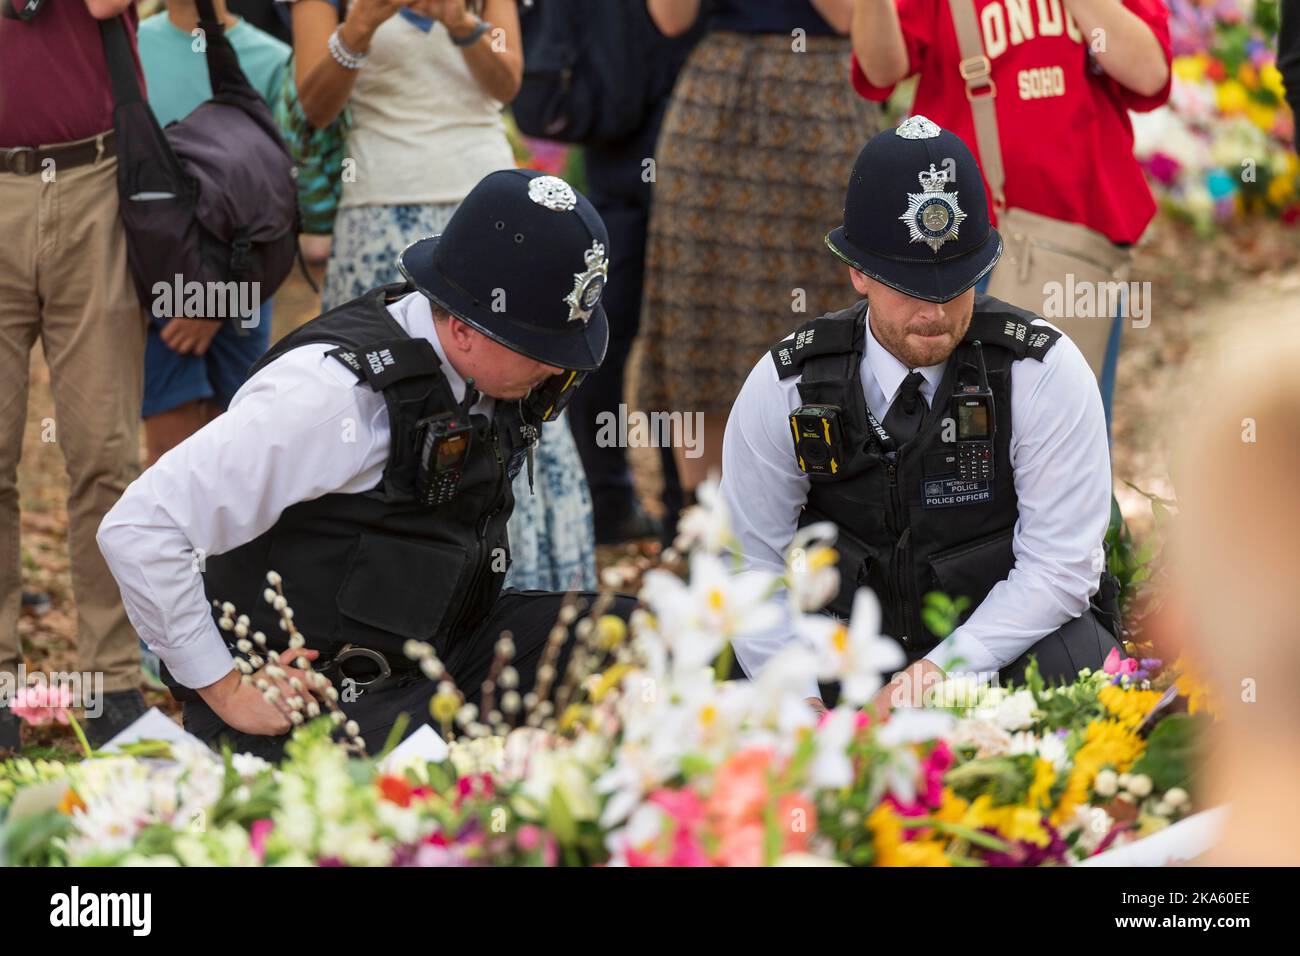 Tw police officers viewing the floral tributes in Green Park, left by mourners to mark the Queen Elizabeth II death. Green Park, London, UK.  11 Sep 2 Stock Photo